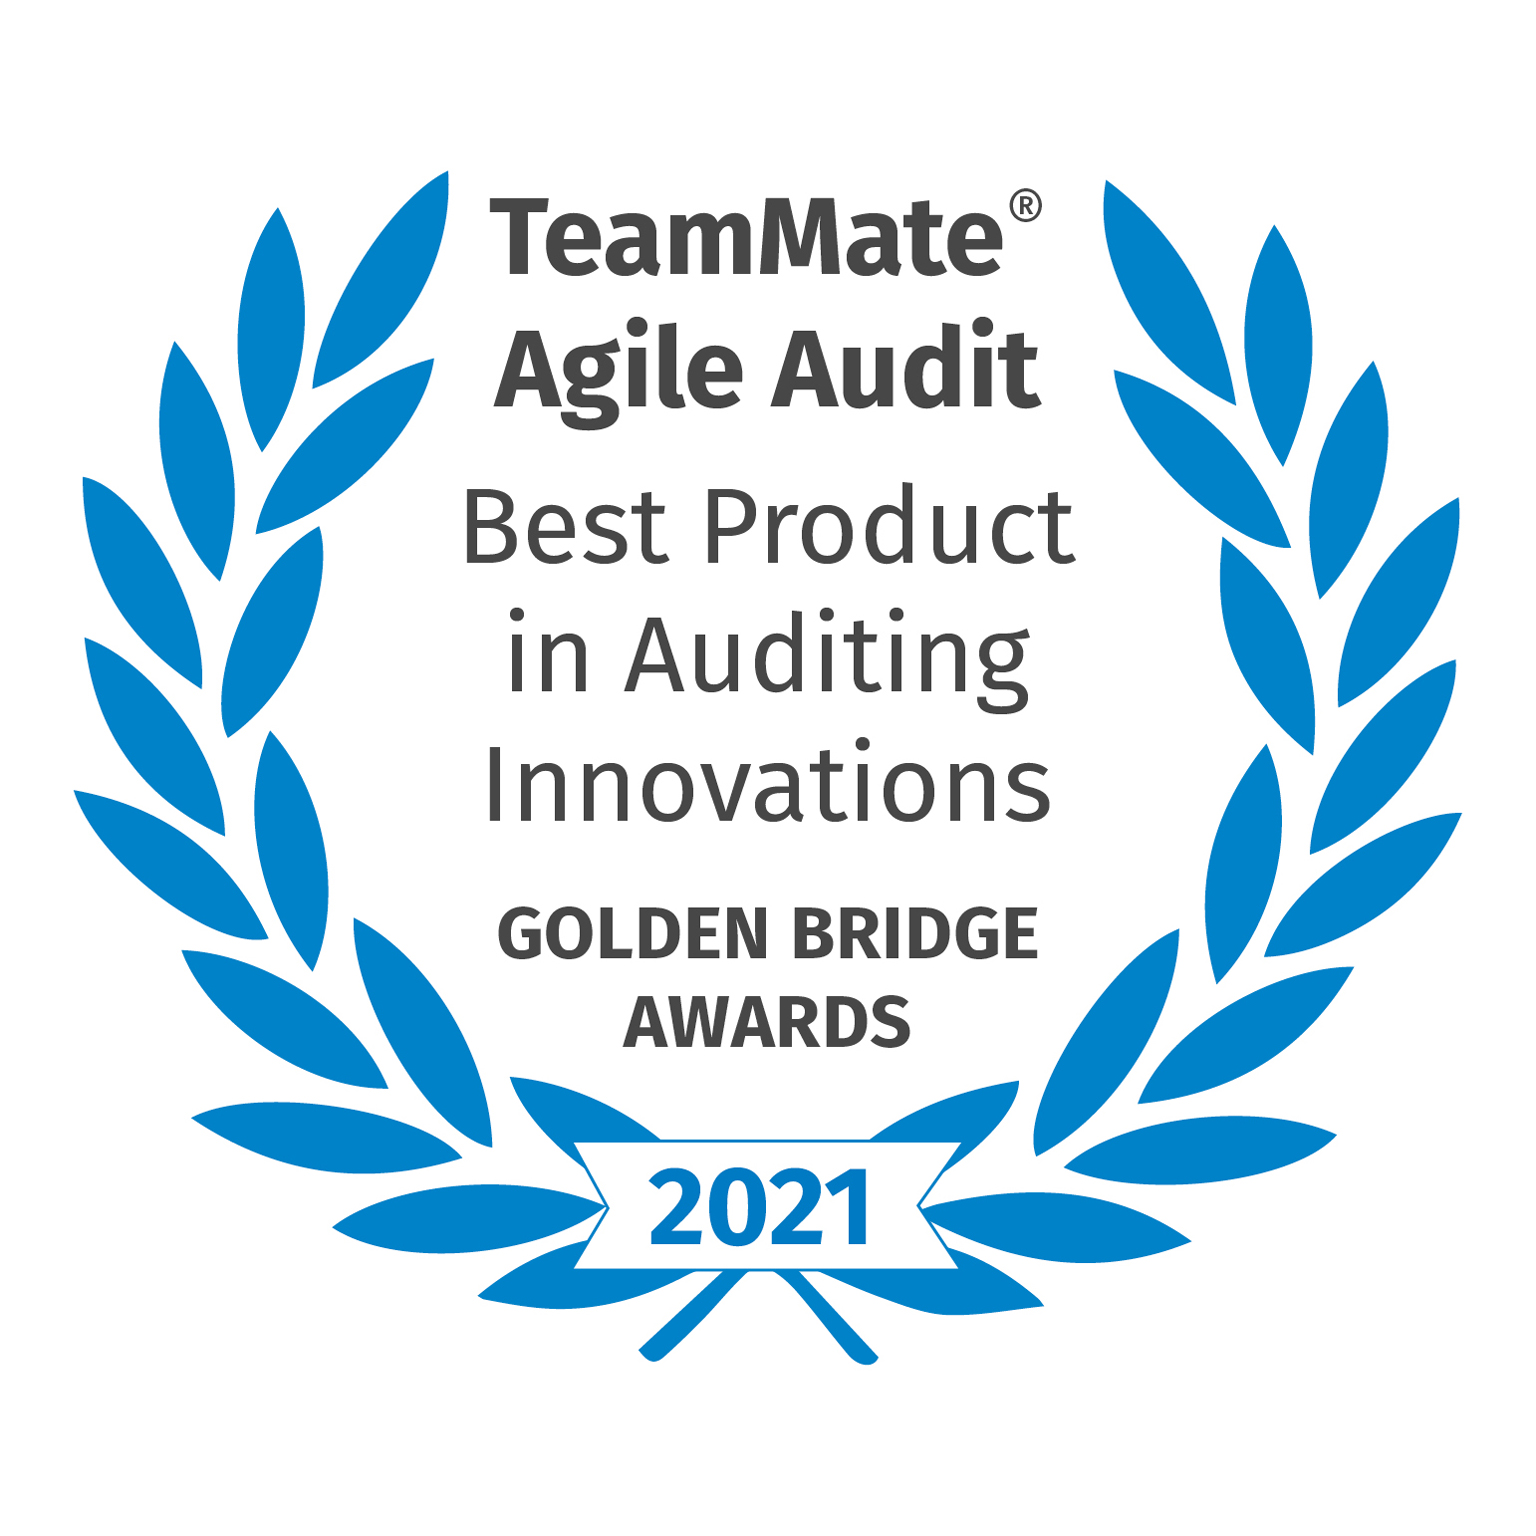 TeamMate Agile Audit - Best Product in Auditing Innovations - Golden Bridge Awards - 2021